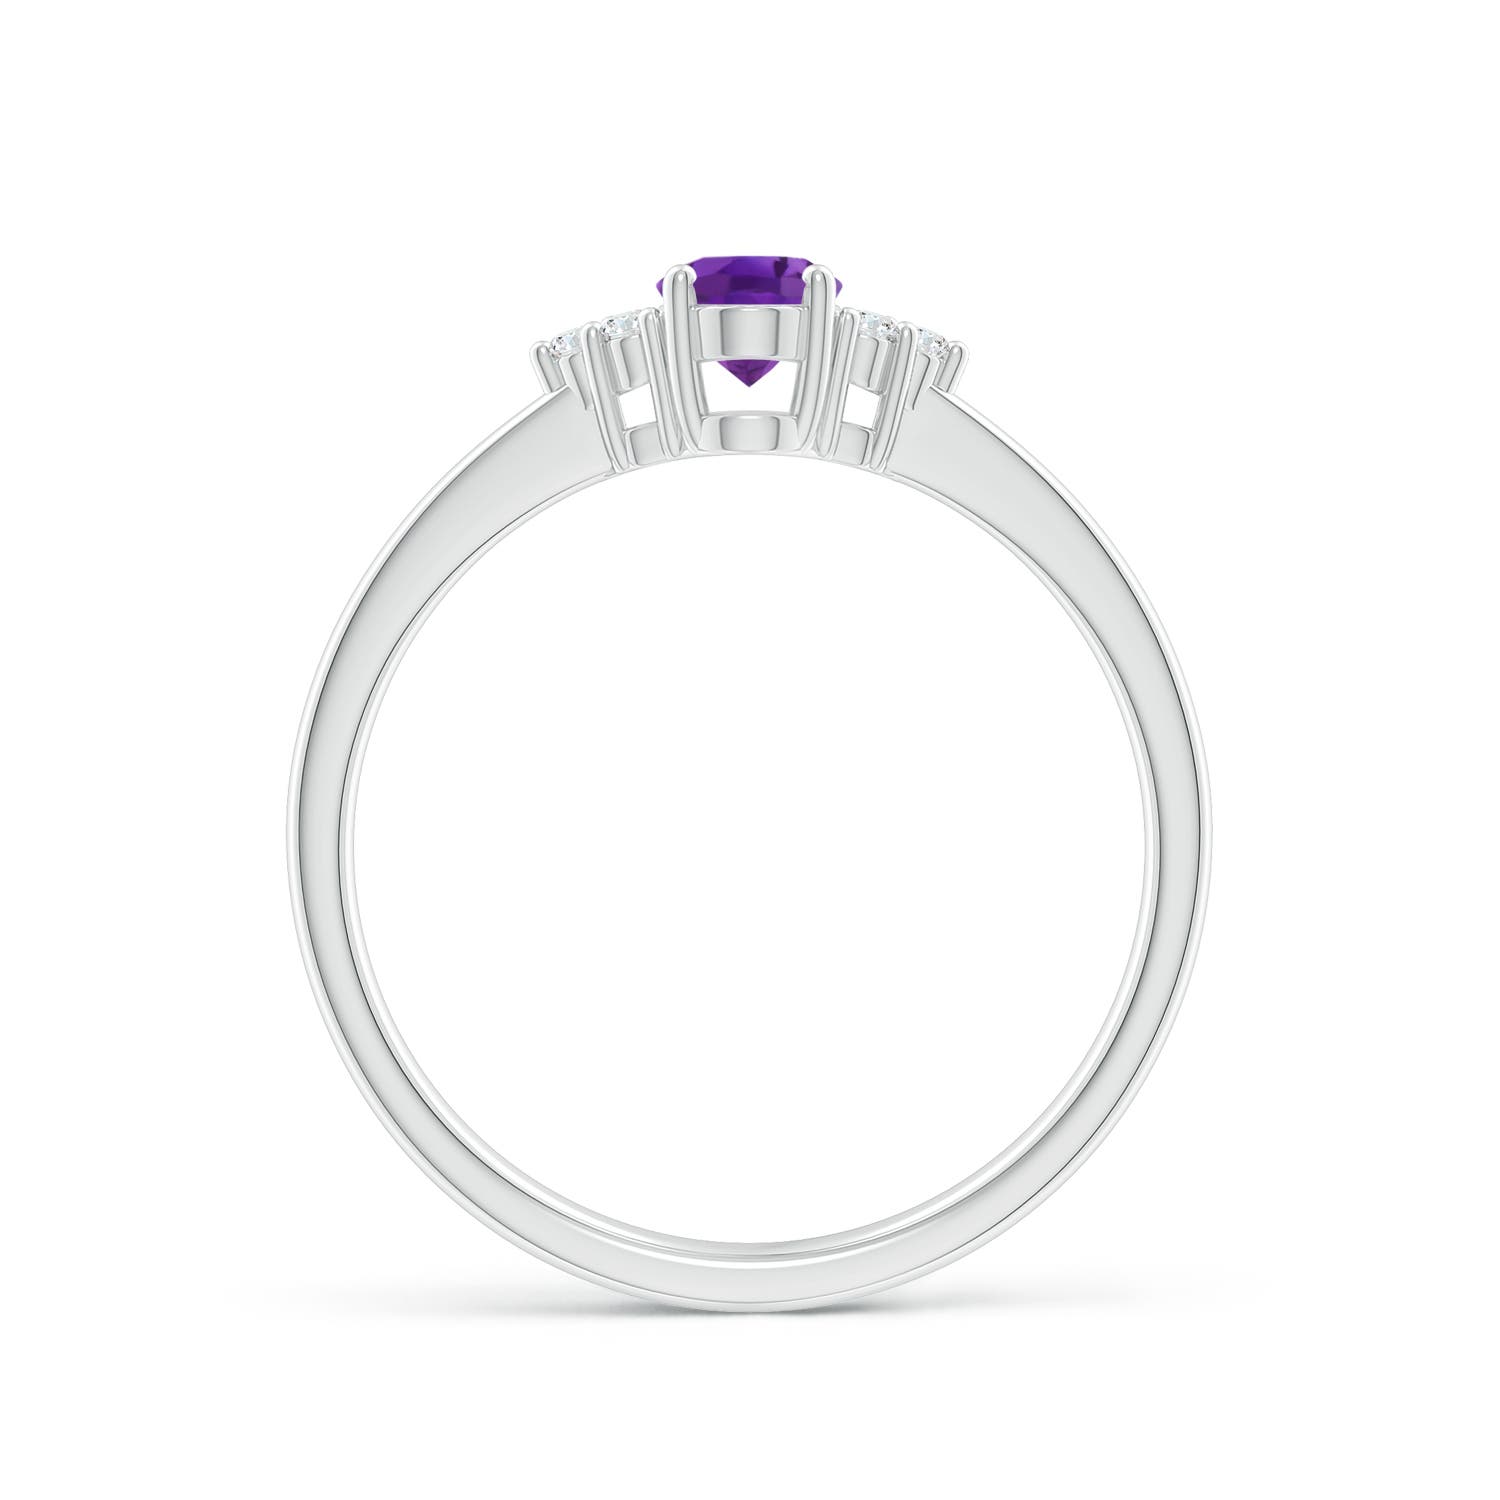 AAA - Amethyst / 0.46 CT / 14 KT White Gold